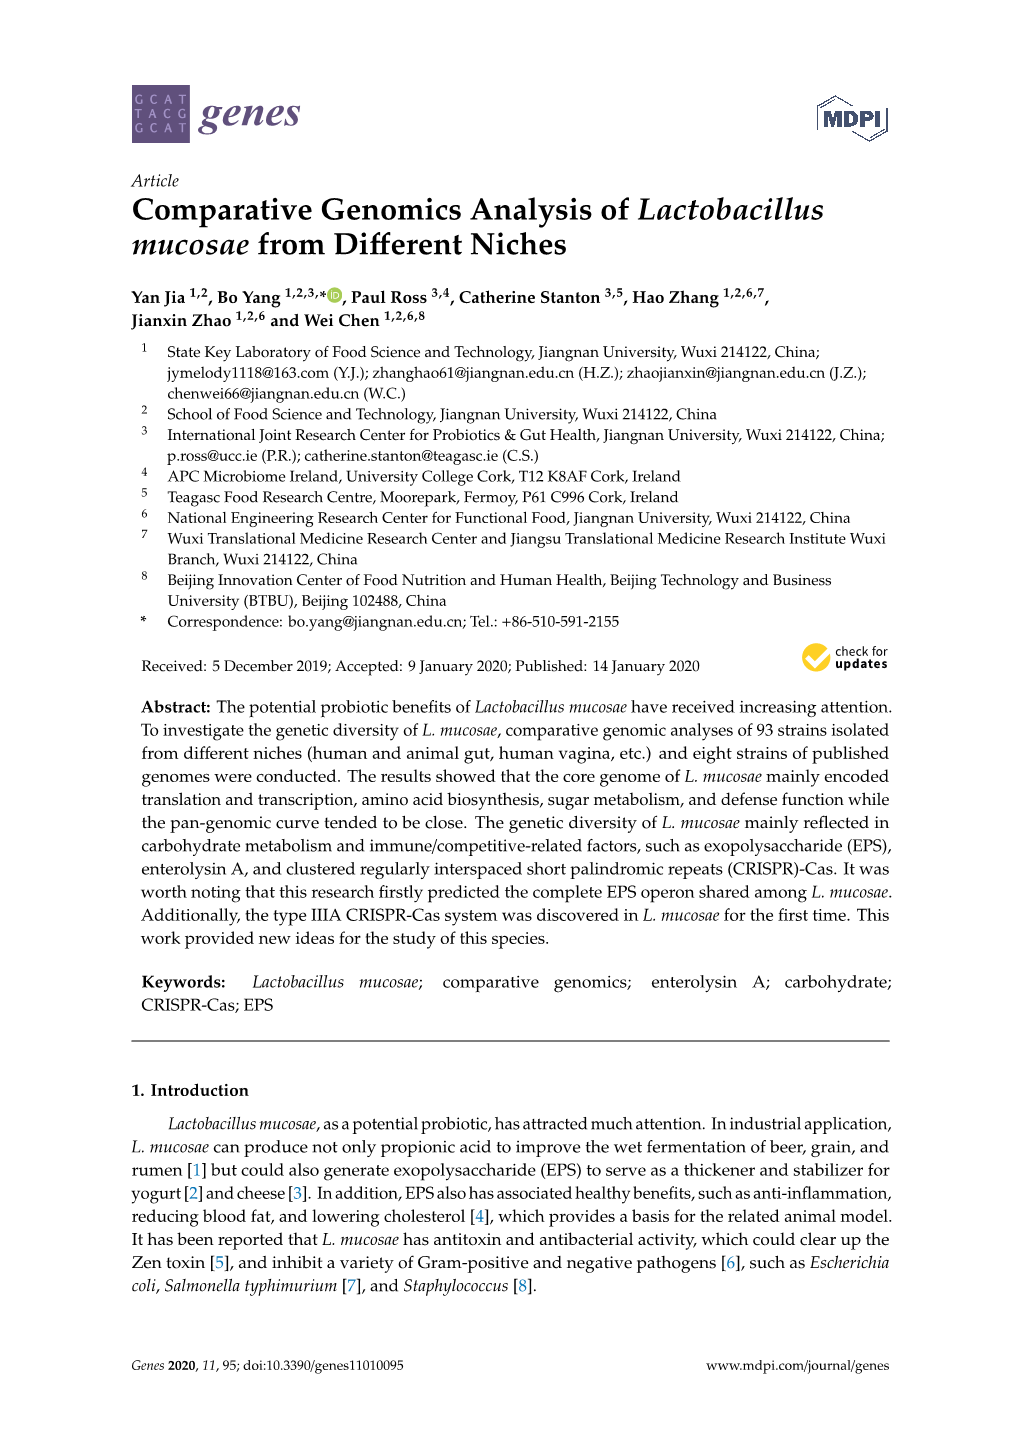 Comparative Genomics Analysis of Lactobacillus Mucosae from Diﬀerent Niches